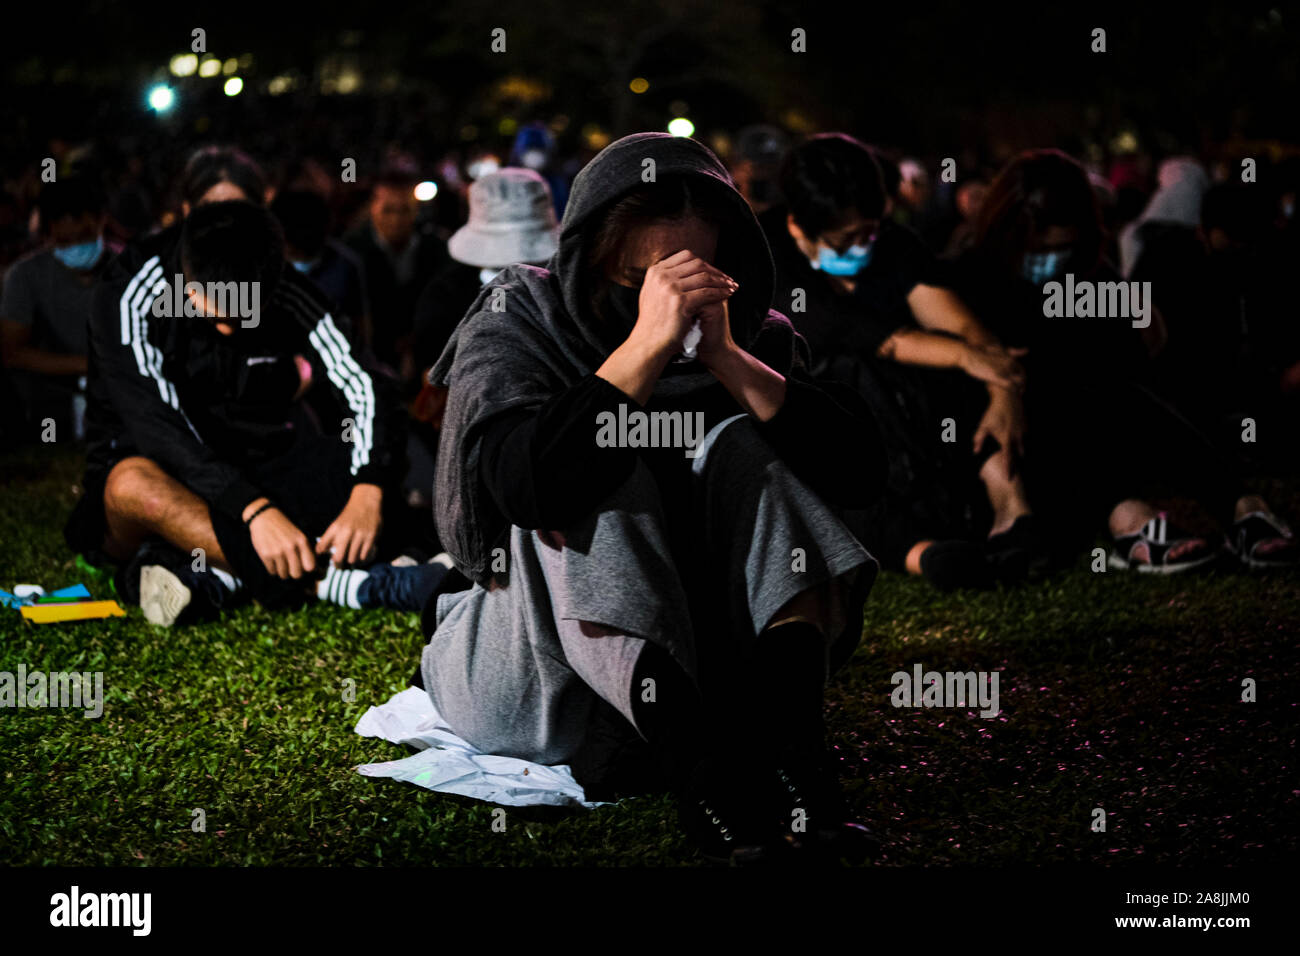 A woman in grief during the rally.Memorial rally at Tamar Park in Hong Kong to mourn the death of a 22 years old university student, Alex Chow Tsz Lok who died from a serious brain injury during a fall on November 4th as police skirmished with demonstrators last weekend. He was left in critical condition and died after suffering a cardiac arrest. Stock Photo